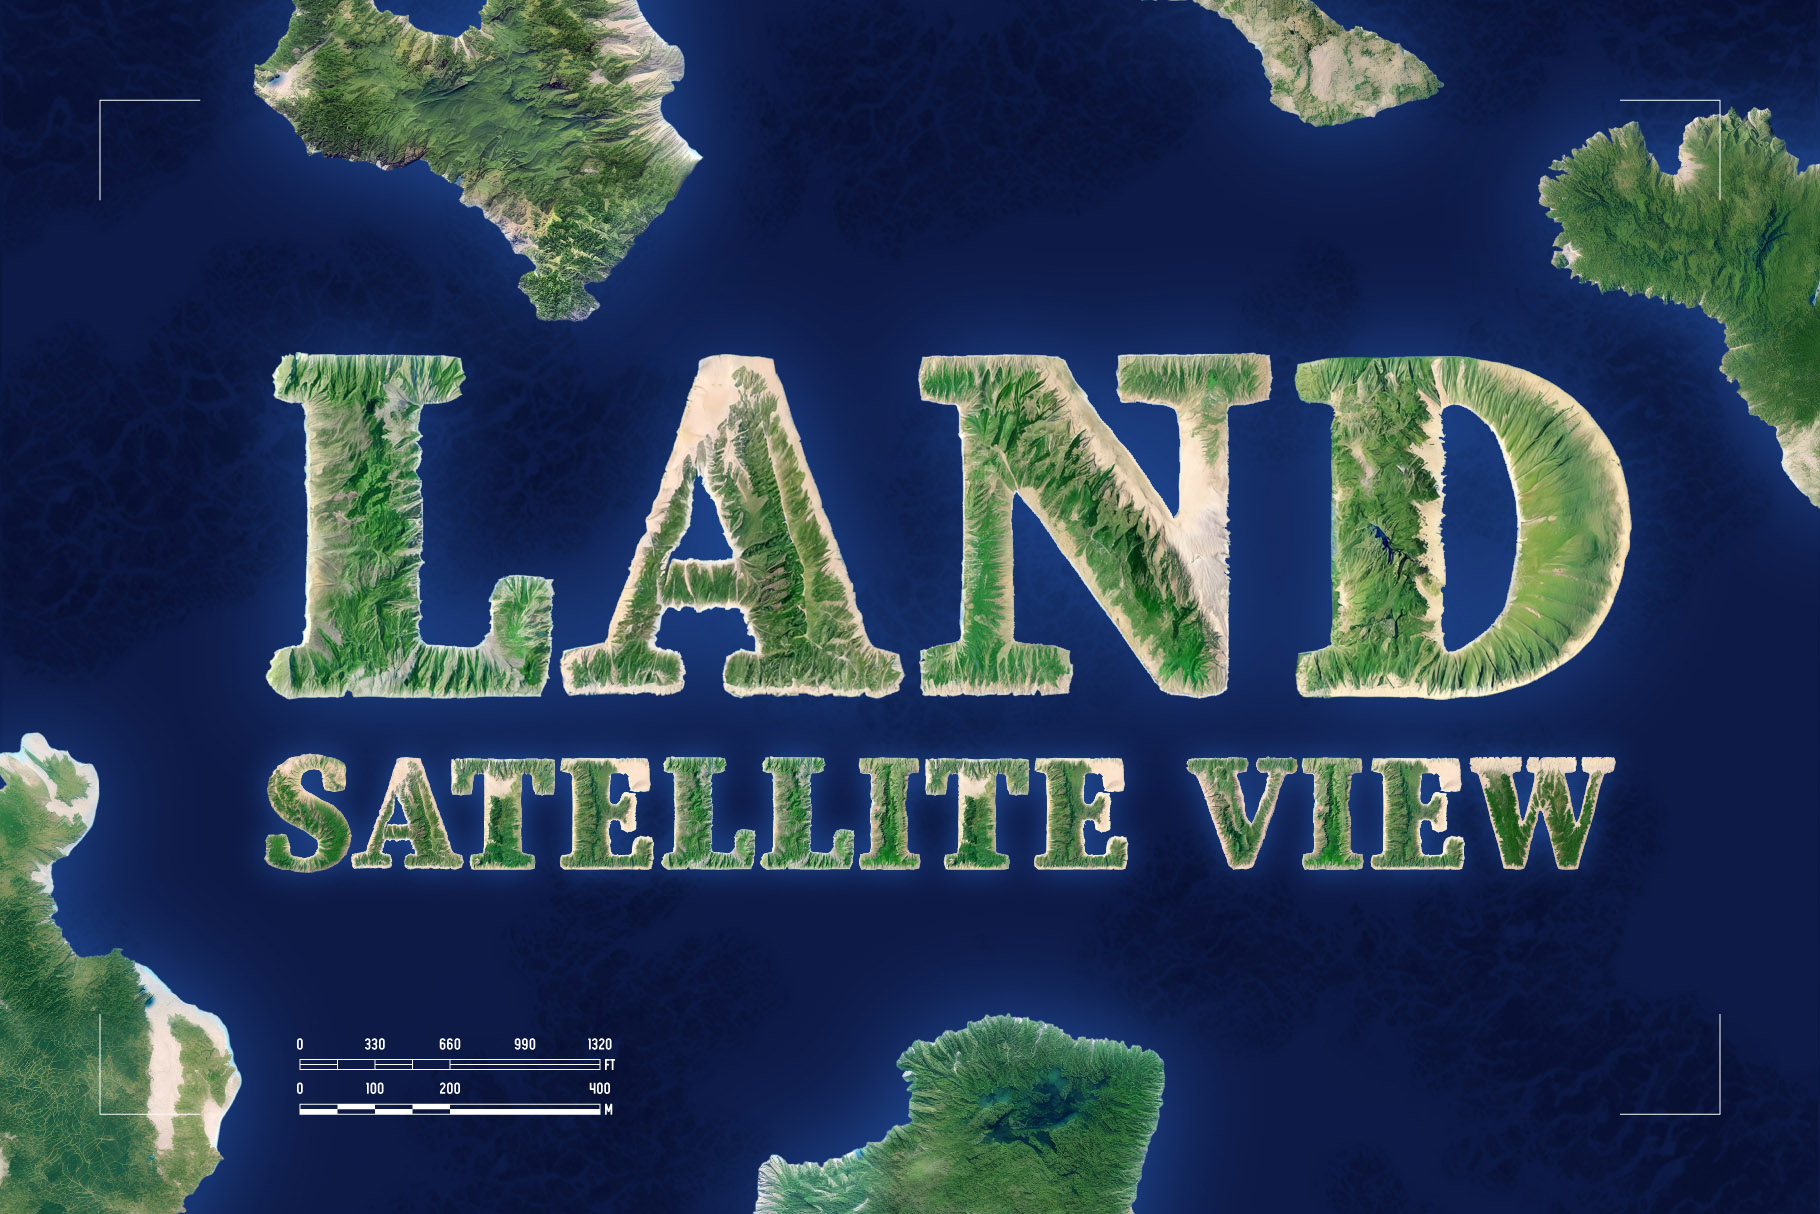 The words land satellite view surrounded by green trees.